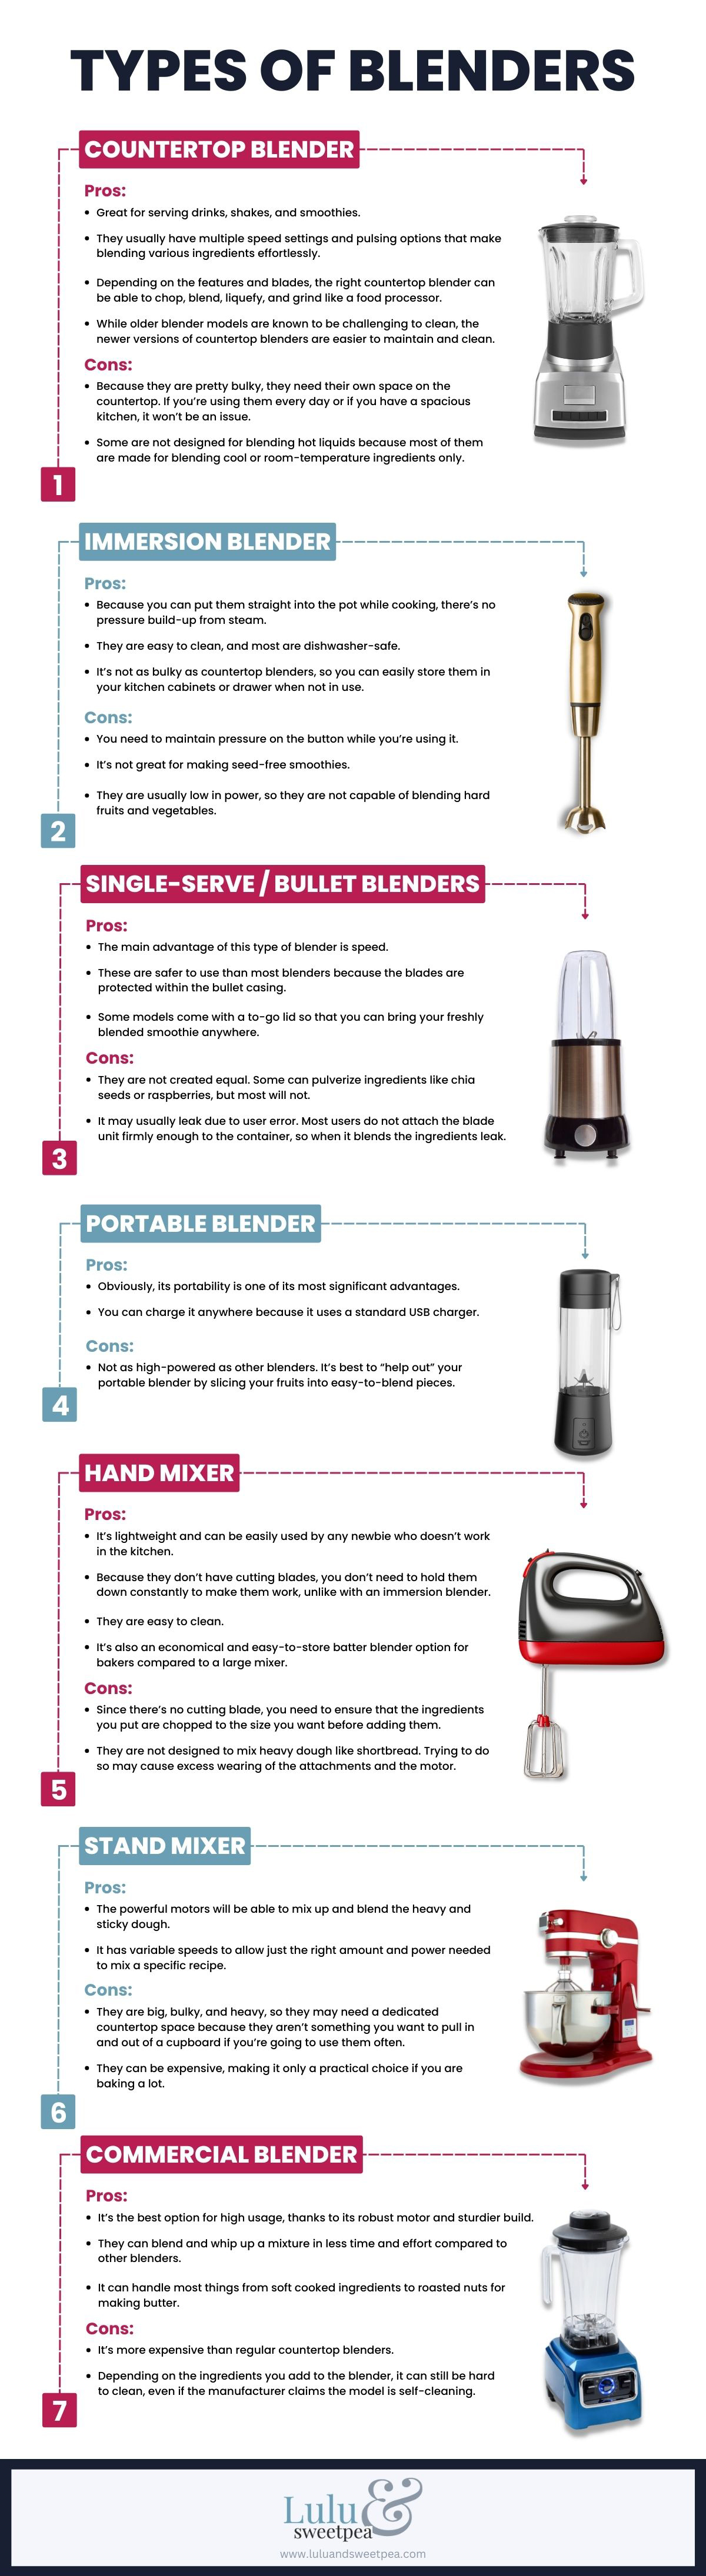 Know the Different Types of Blenders